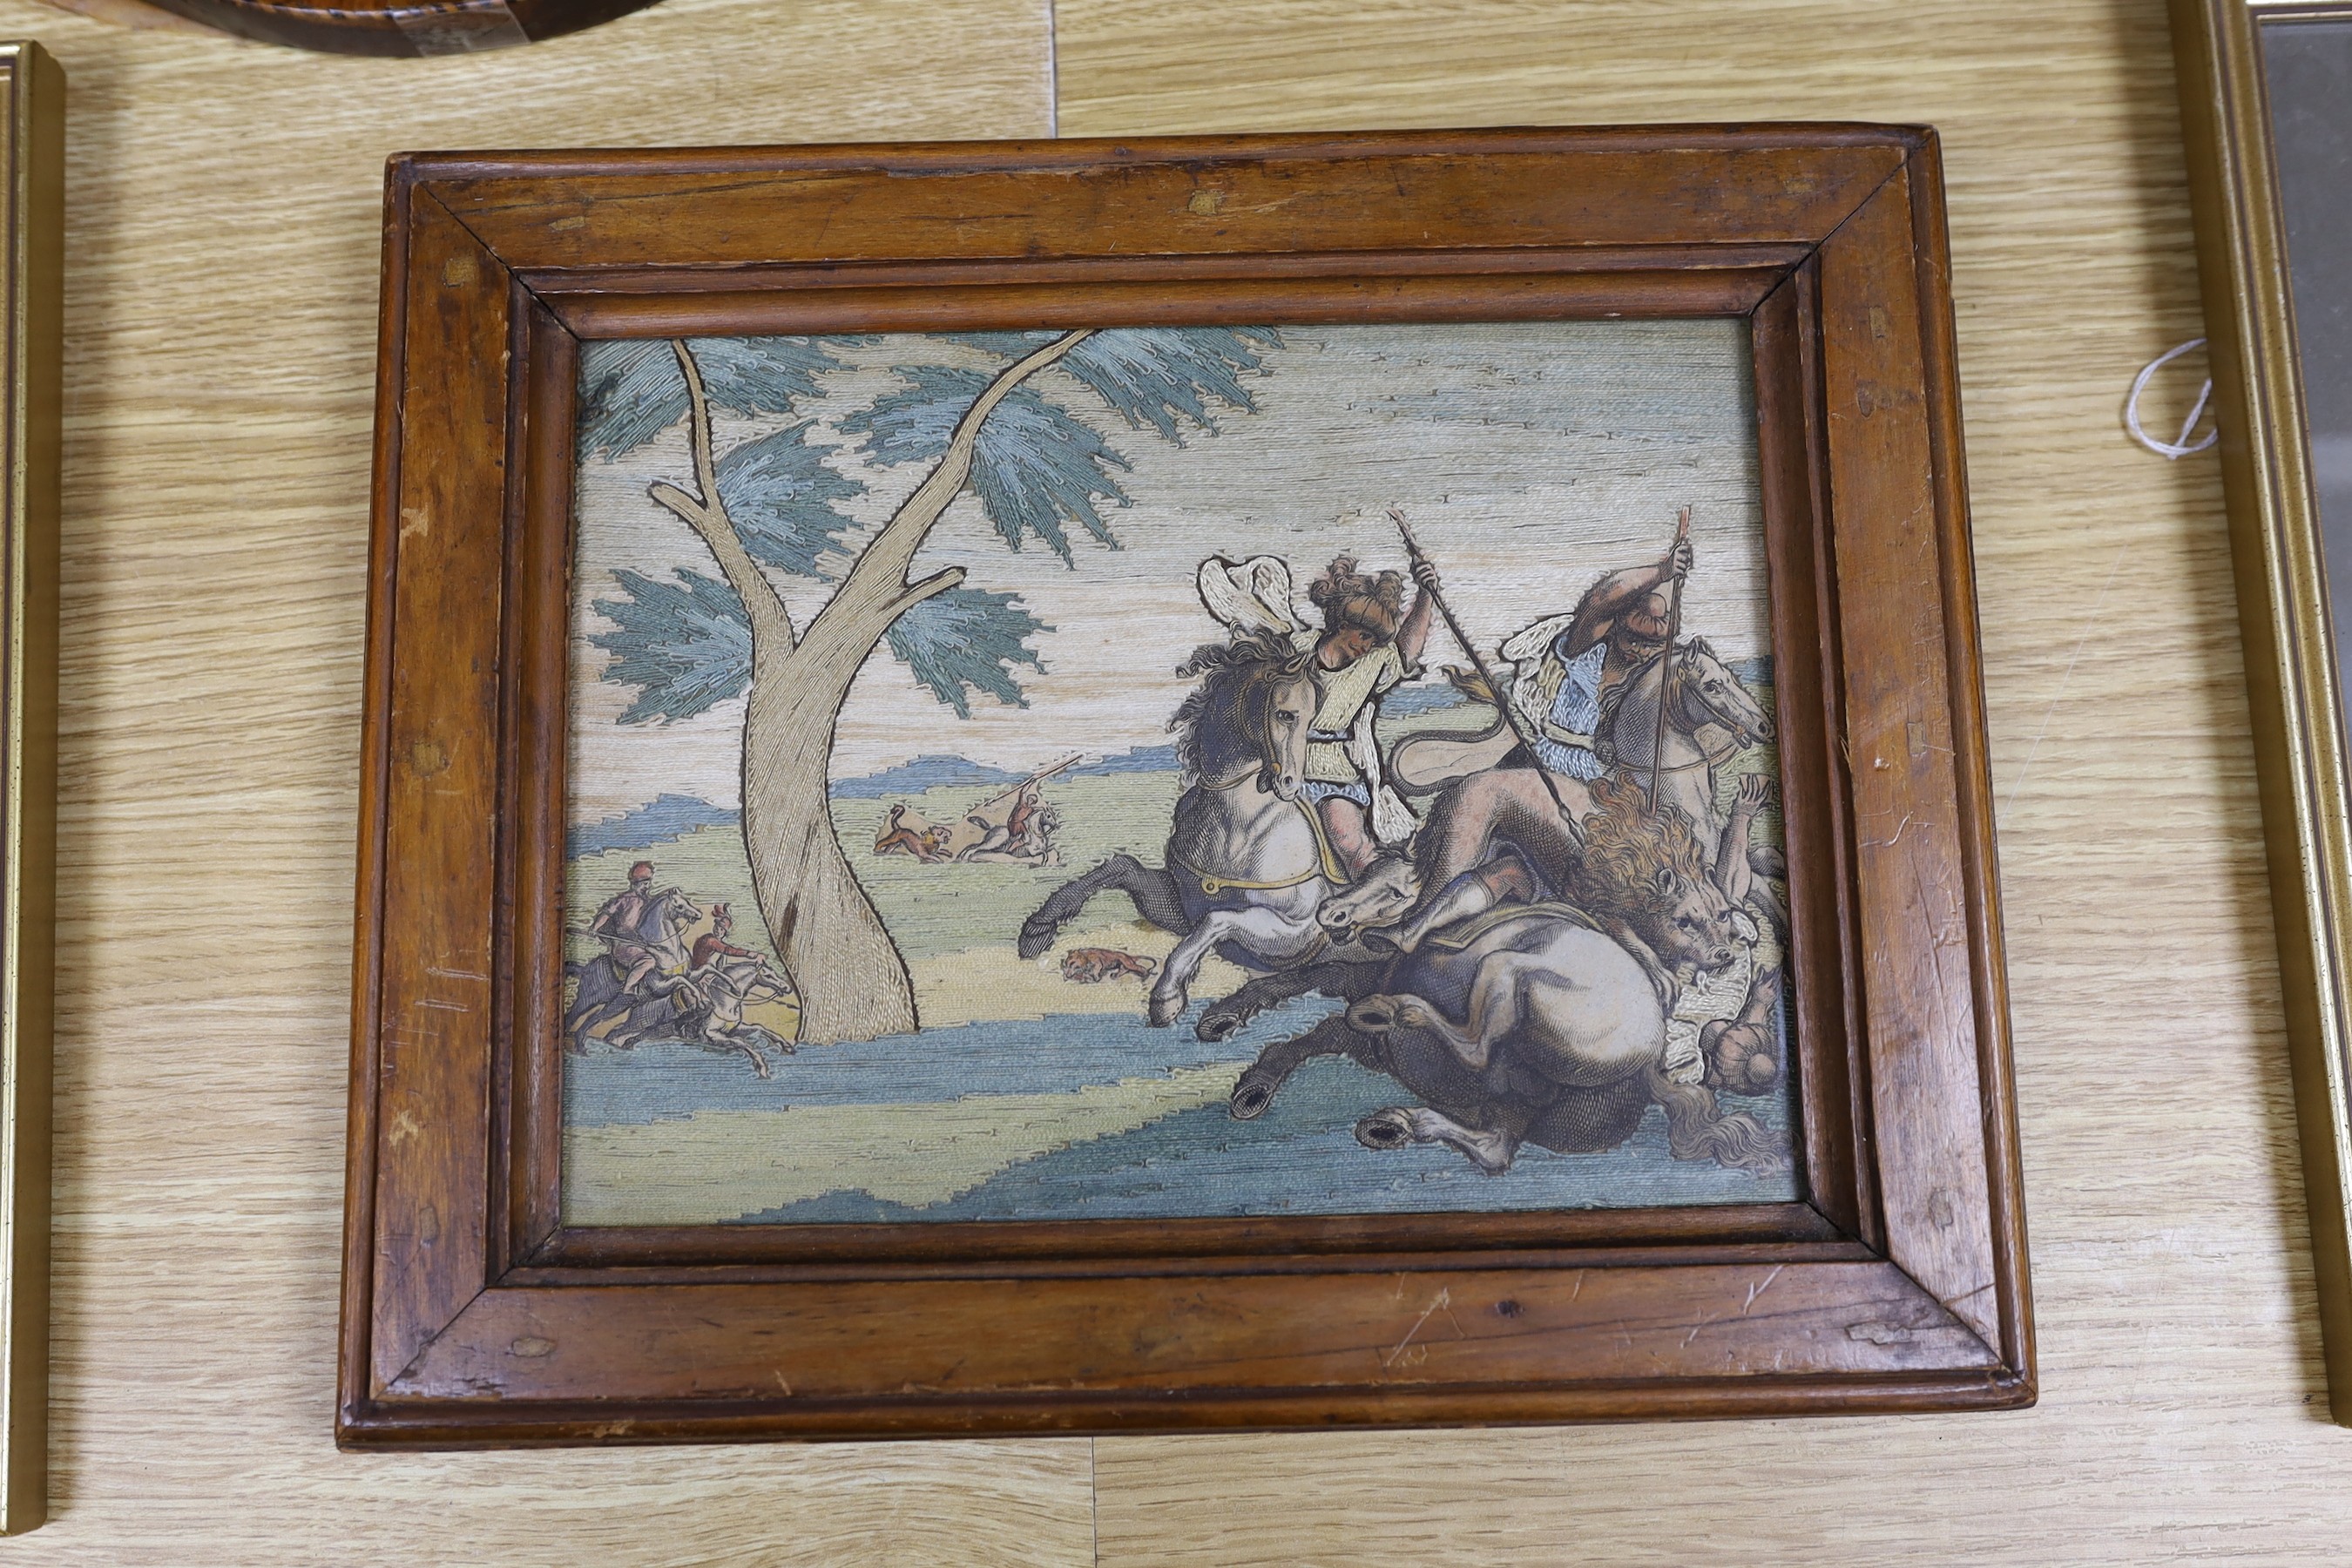 Three late 19th / early 20th century framed tapestries - a mountain scape with farmer and heard, a female figure with animal, and a with lions and men on horseback fighting scene, together with two maps - ‘Gloucestershir